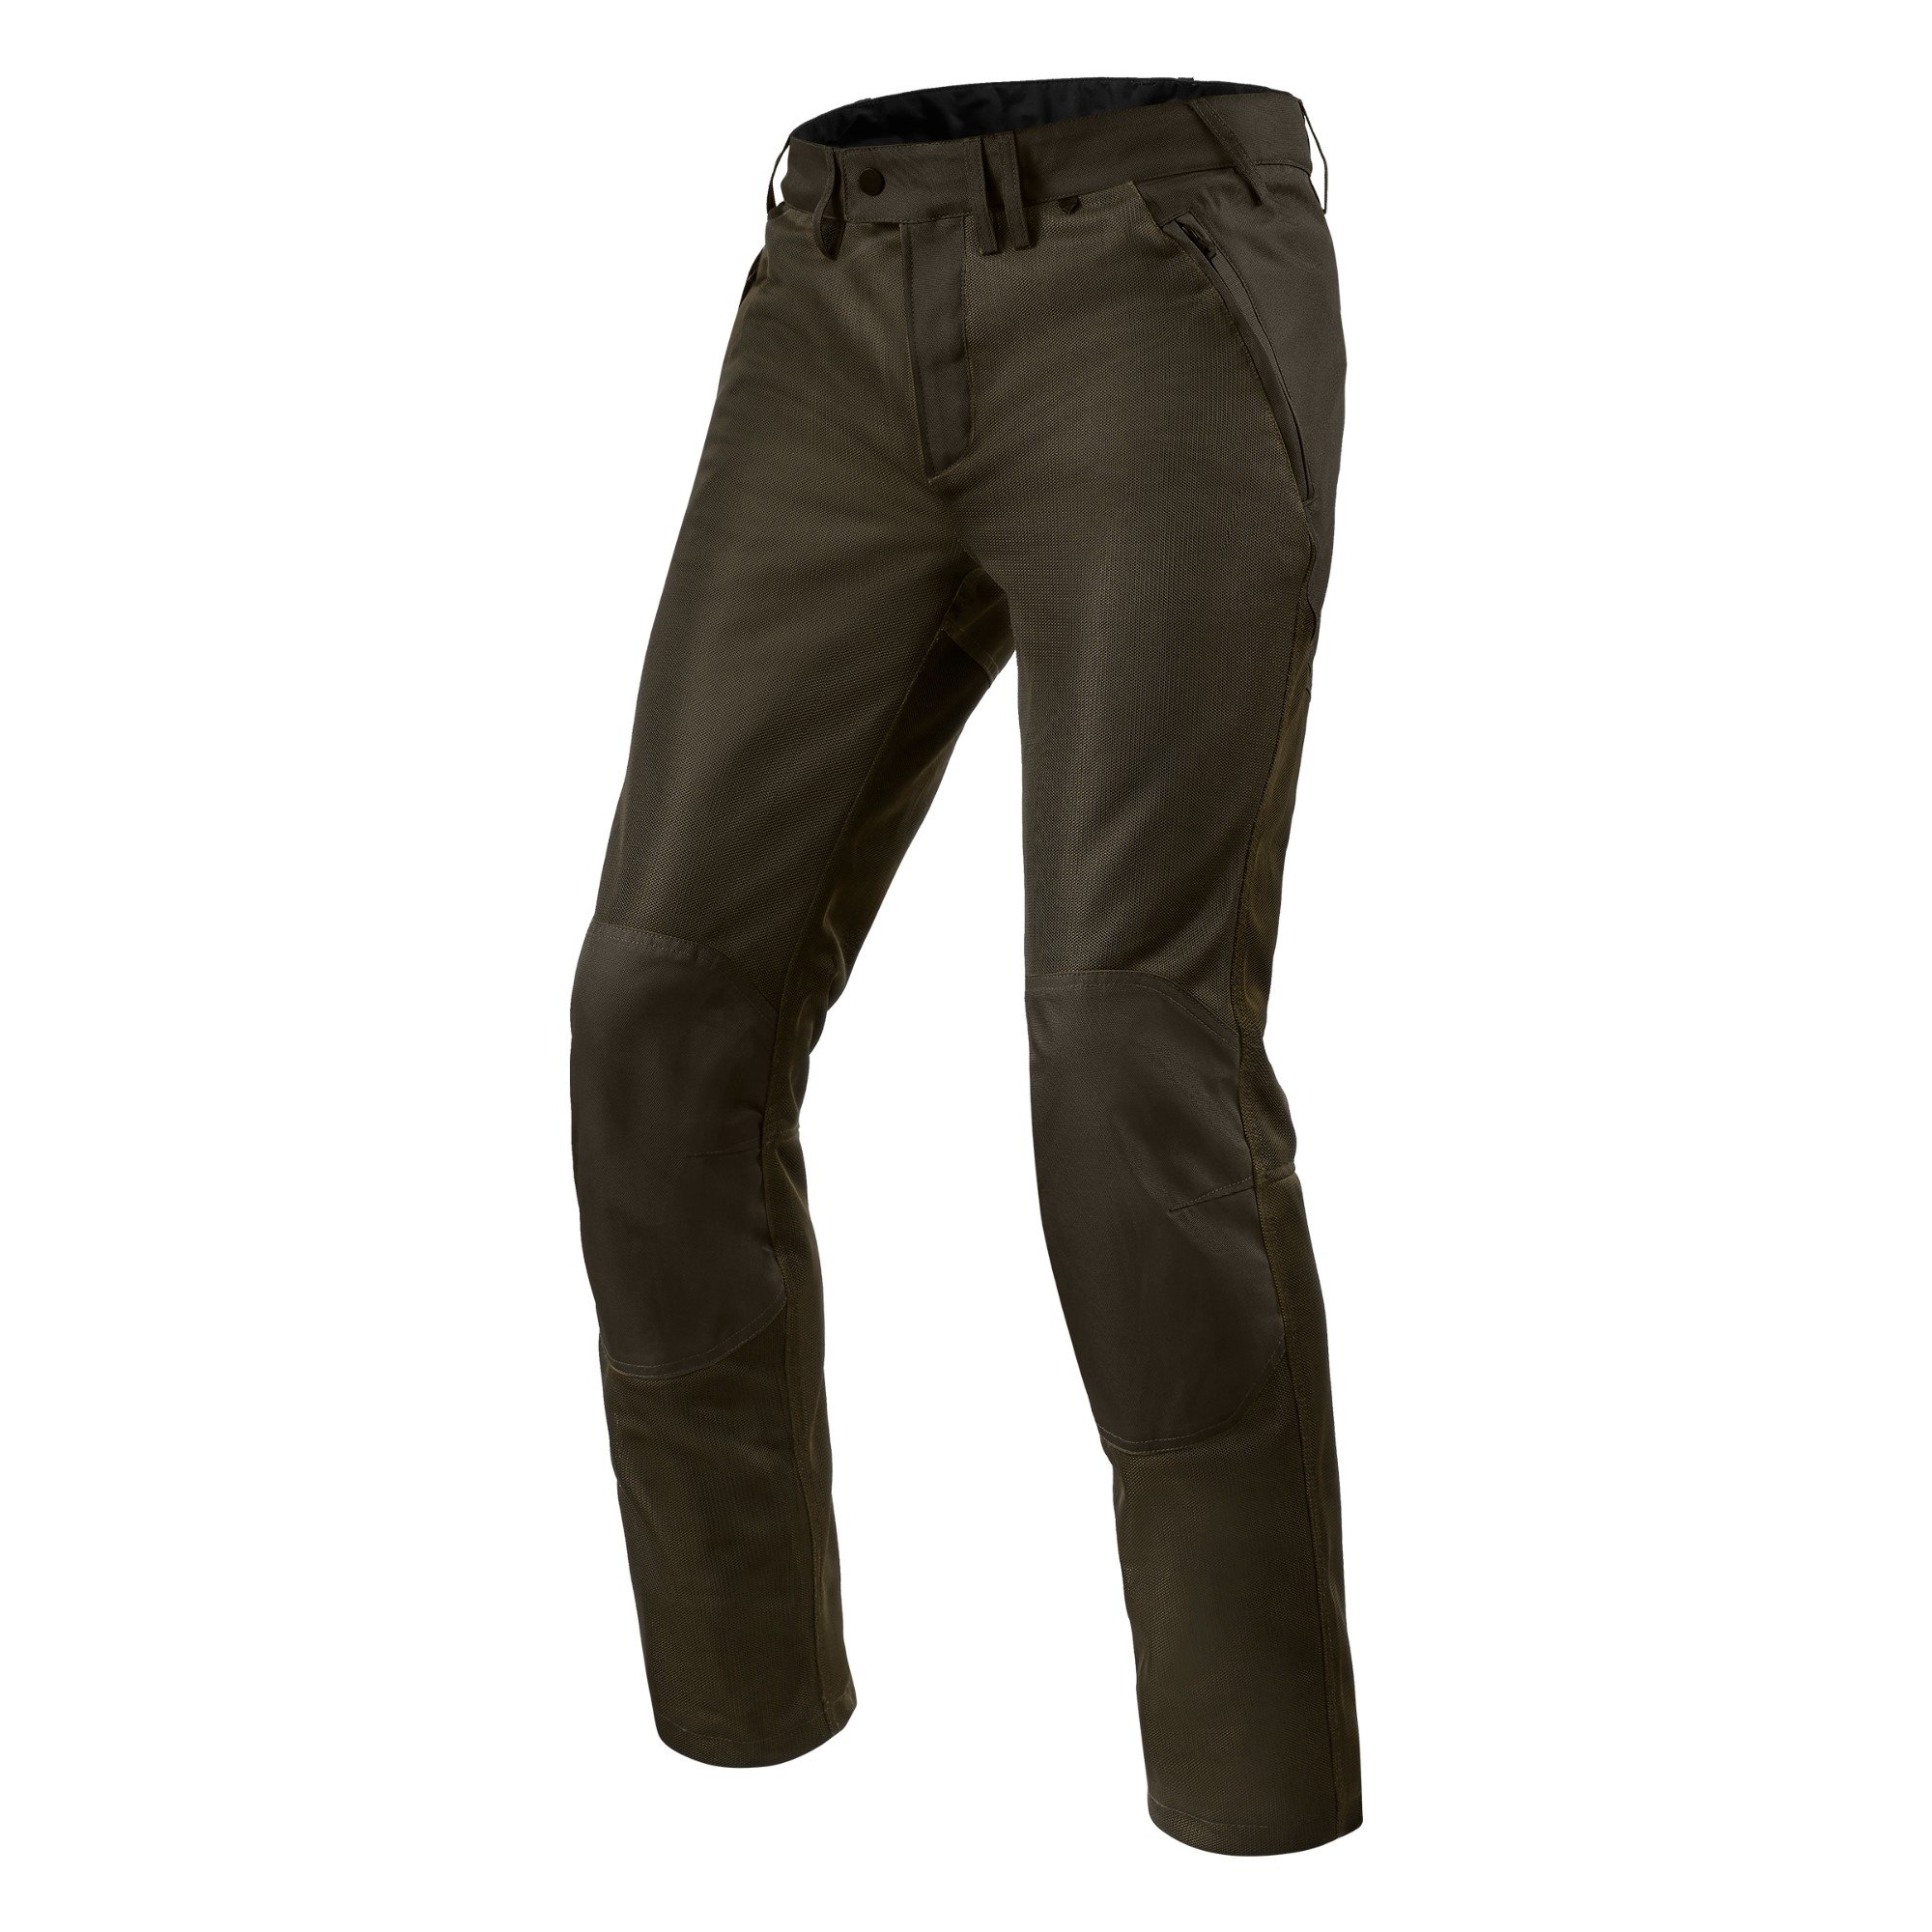 Image of REV'IT! Pants Eclipse 2 Black Olive Long Motorcycle Pants Size S ID 8700001368858